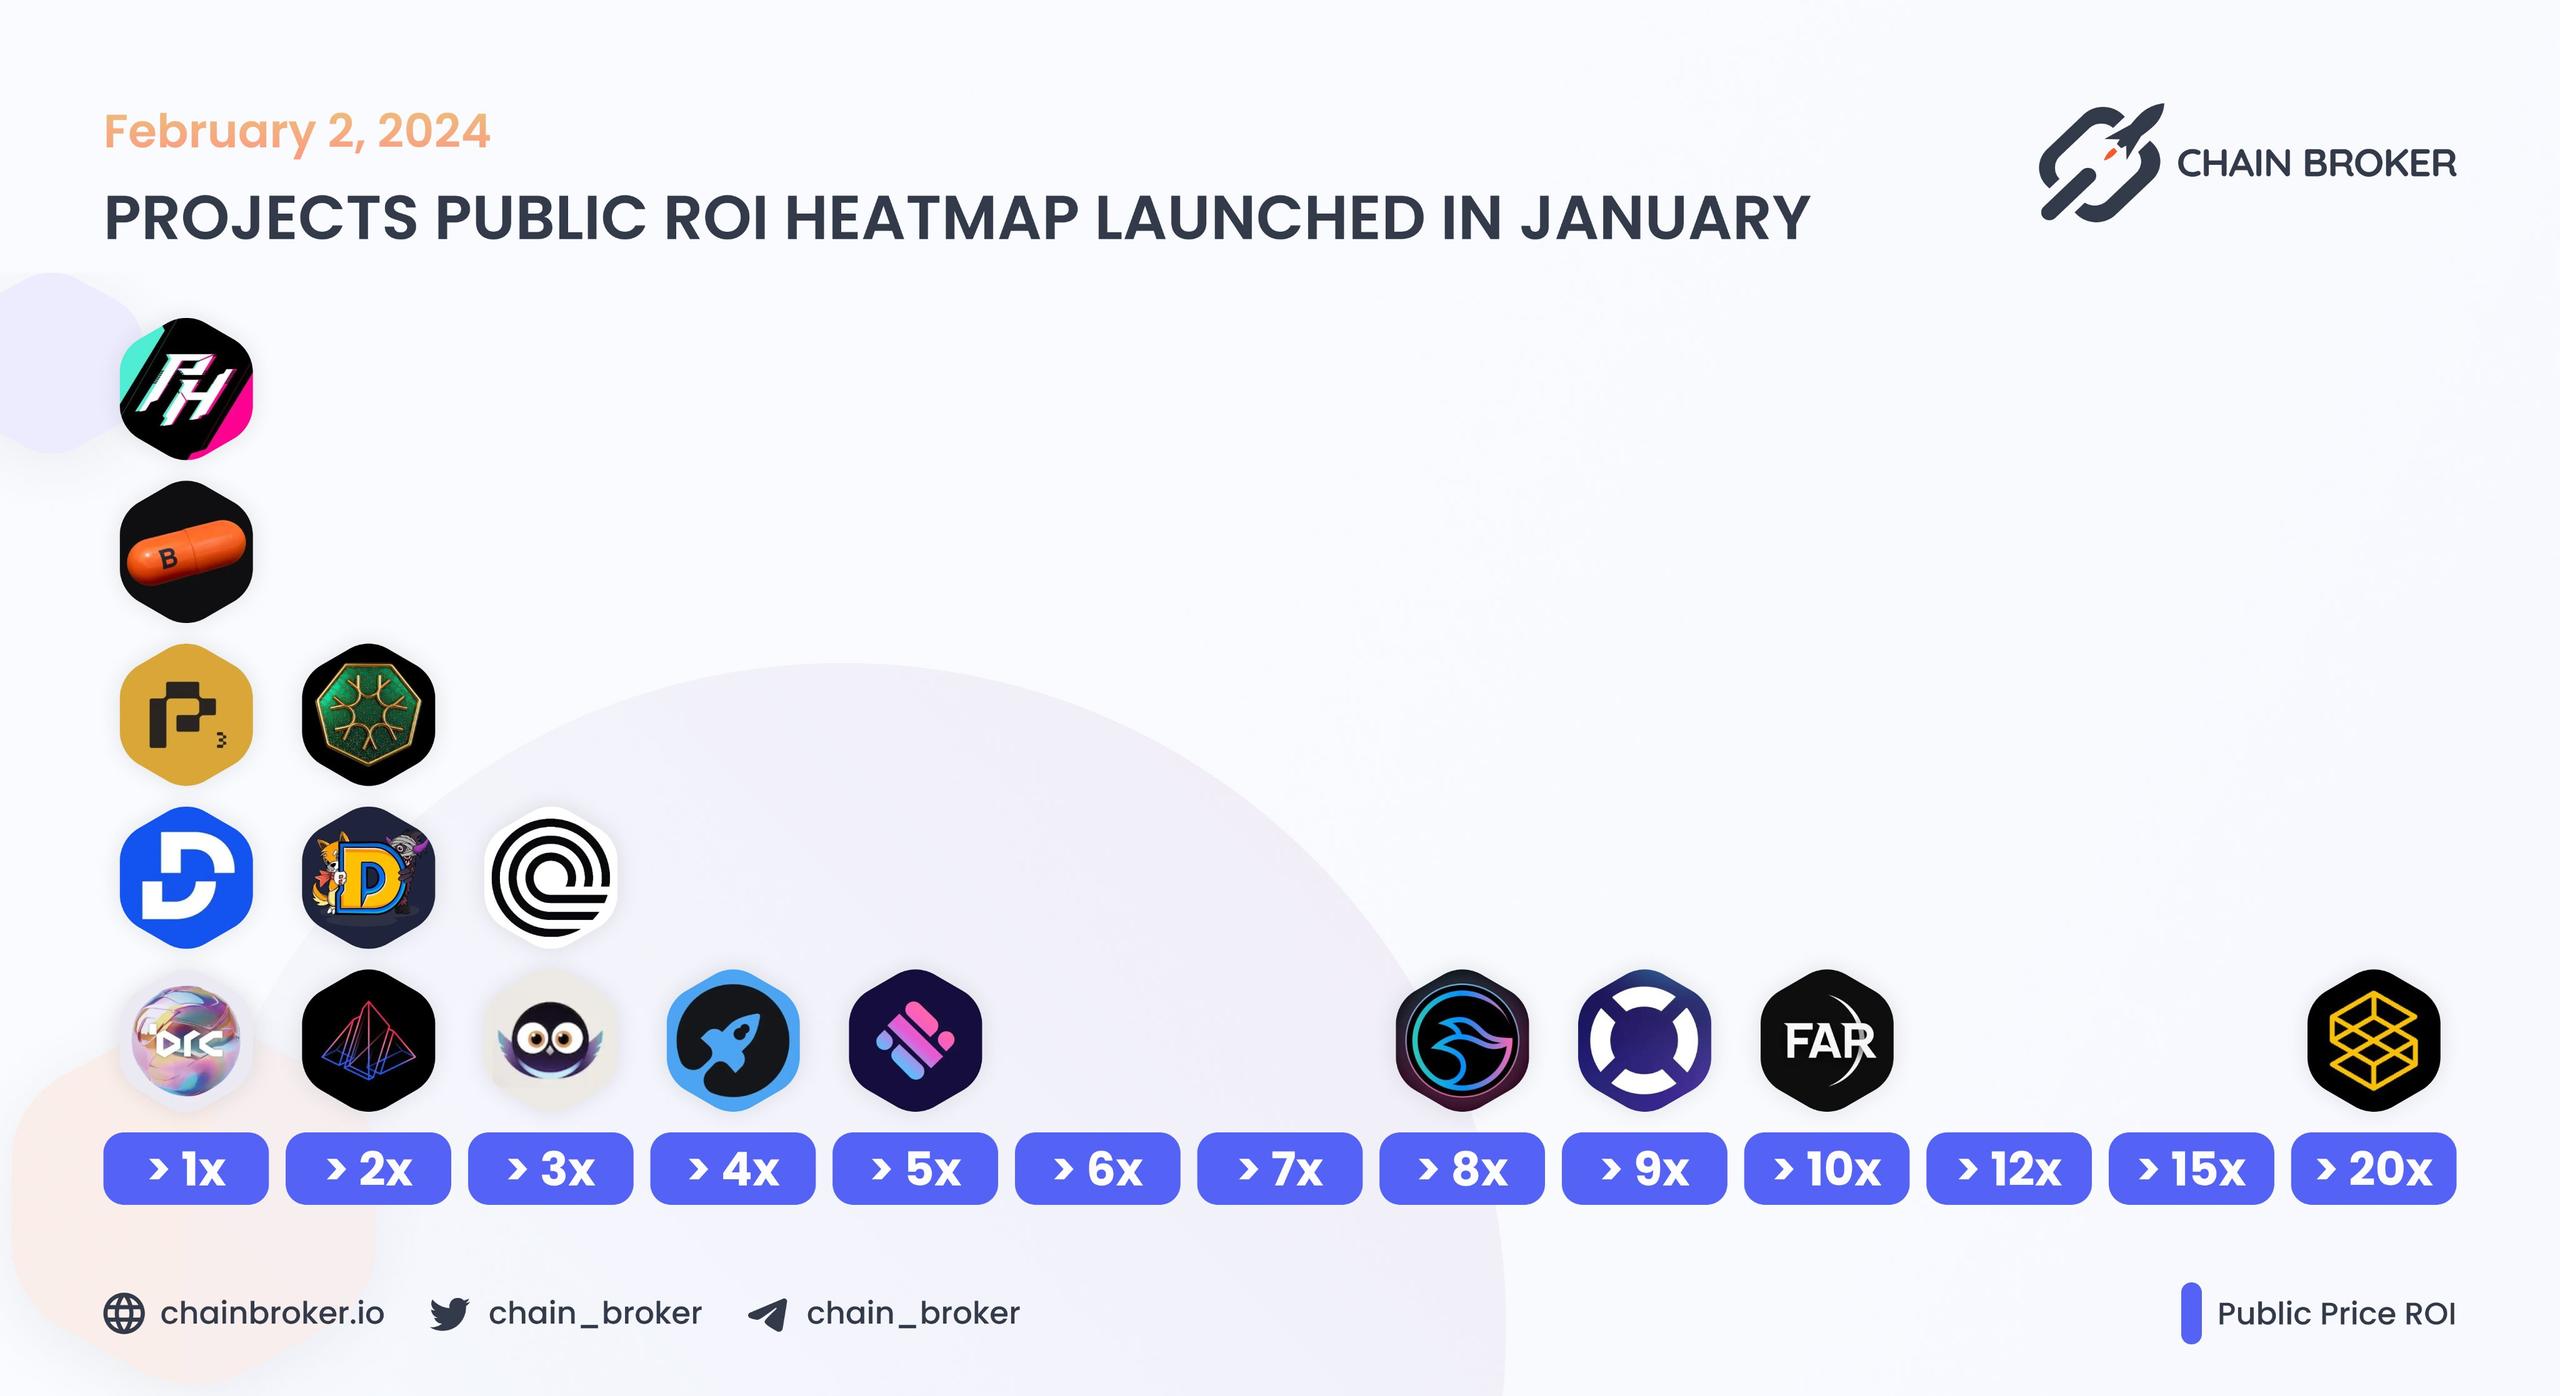 Projects public ROI heatmap launched in January